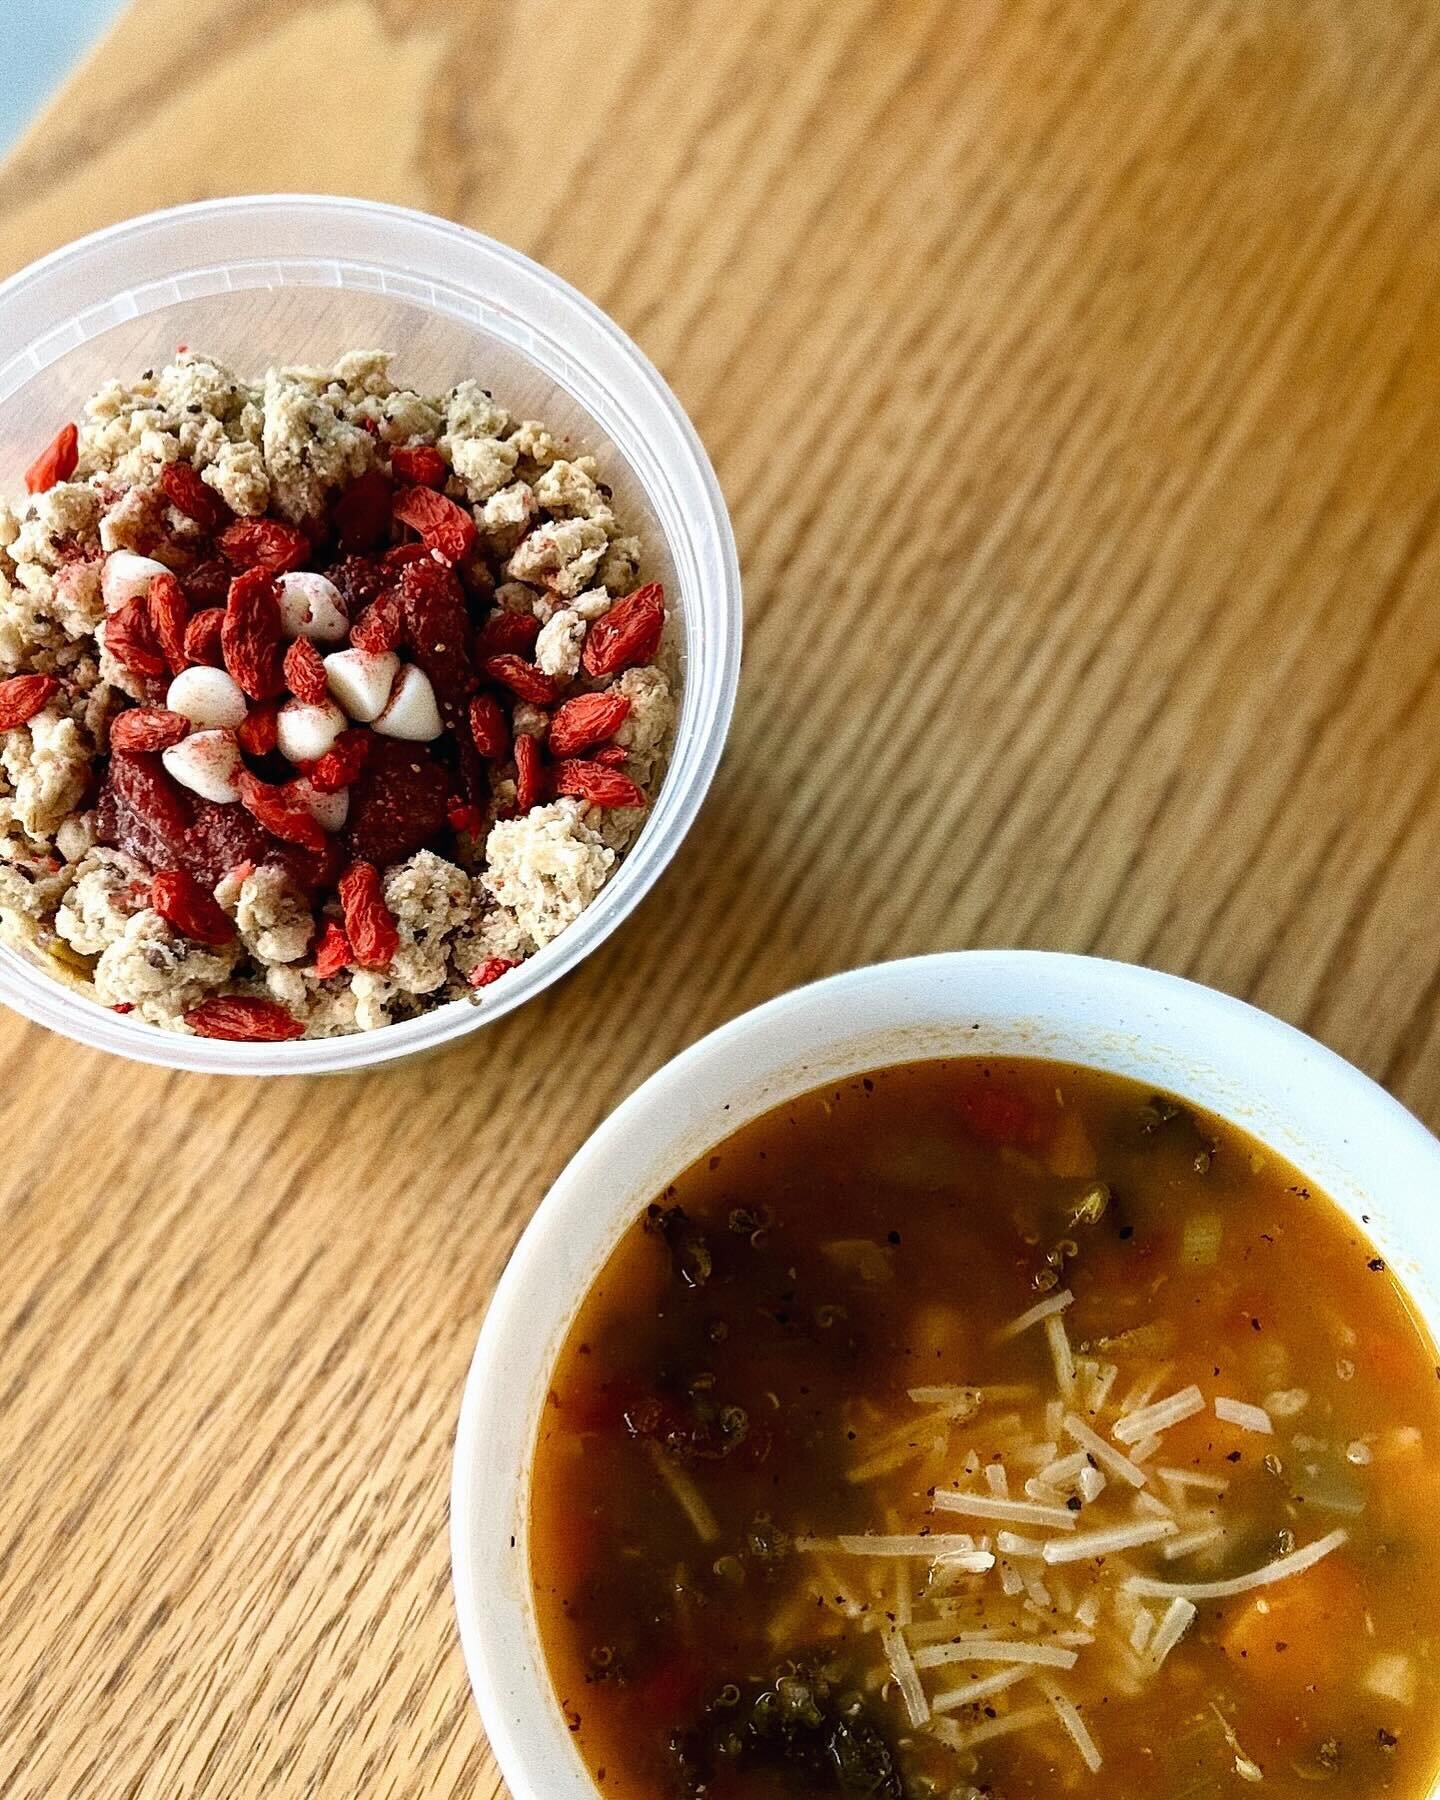 Grab and go offerings are ready to go for the weekend! Here&rsquo;s what we&rsquo;ve got: 

-Matcha and goji berry oats topped with granola and @houseflyvictuals strawberry lavender jam 
-Winter minestrone with quinoa (vegan without parm topping)